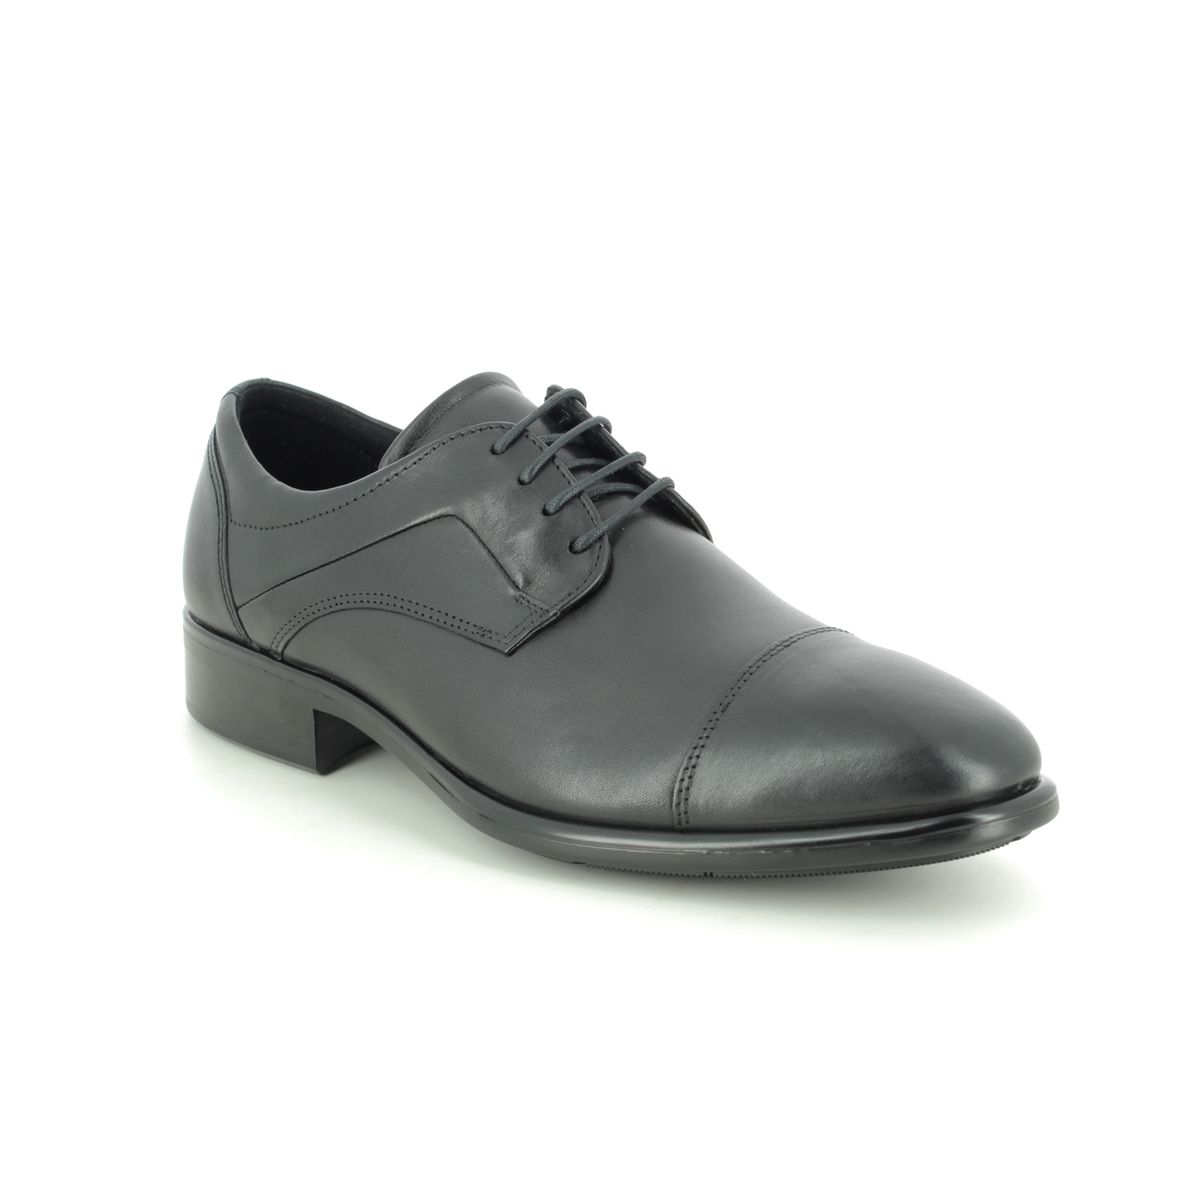 ECCO Citytray Black leather Mens formal shoes 512704-01001 in a Plain Leather in Size 46